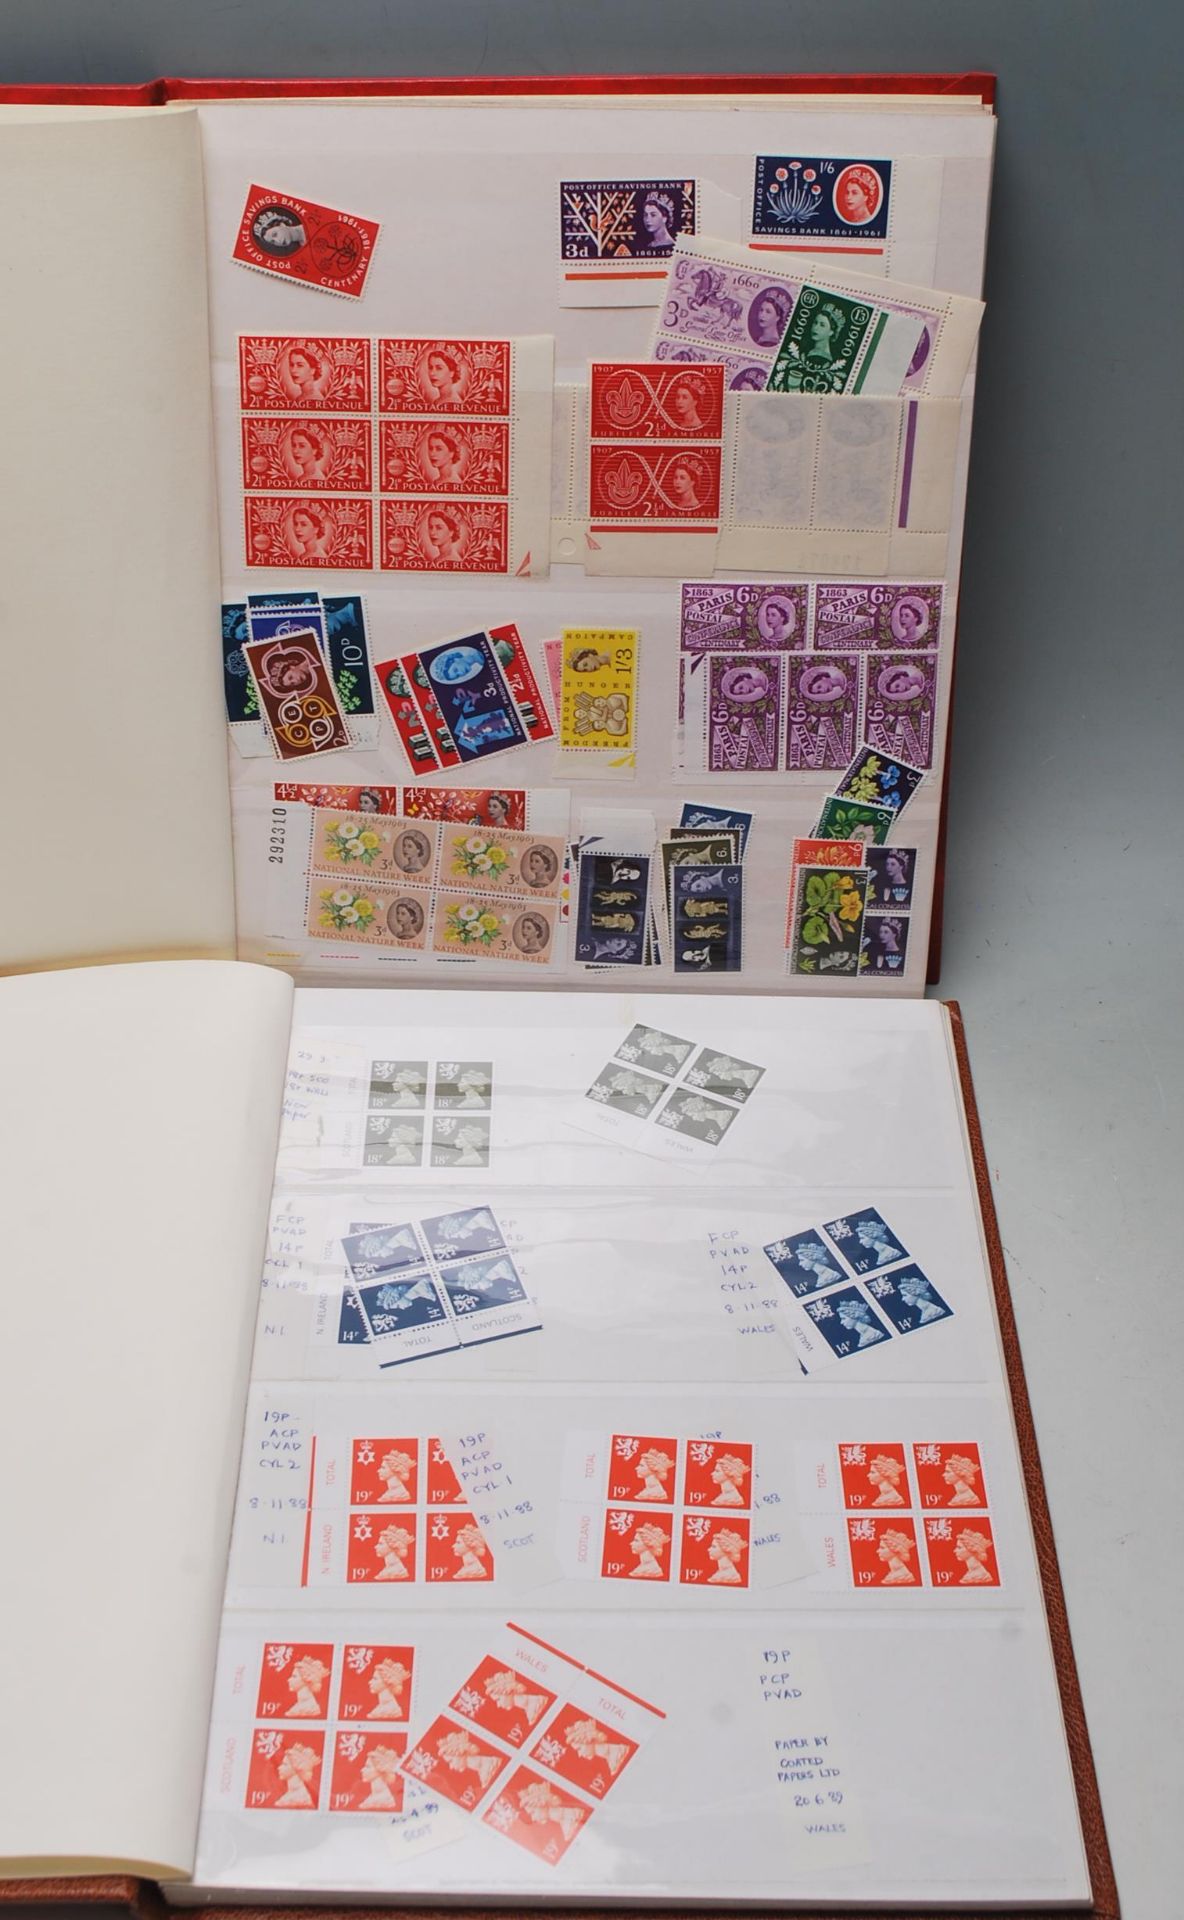 TWO BLOCK STAMP ALBUMS - REGIONAL AND PRESENTATION